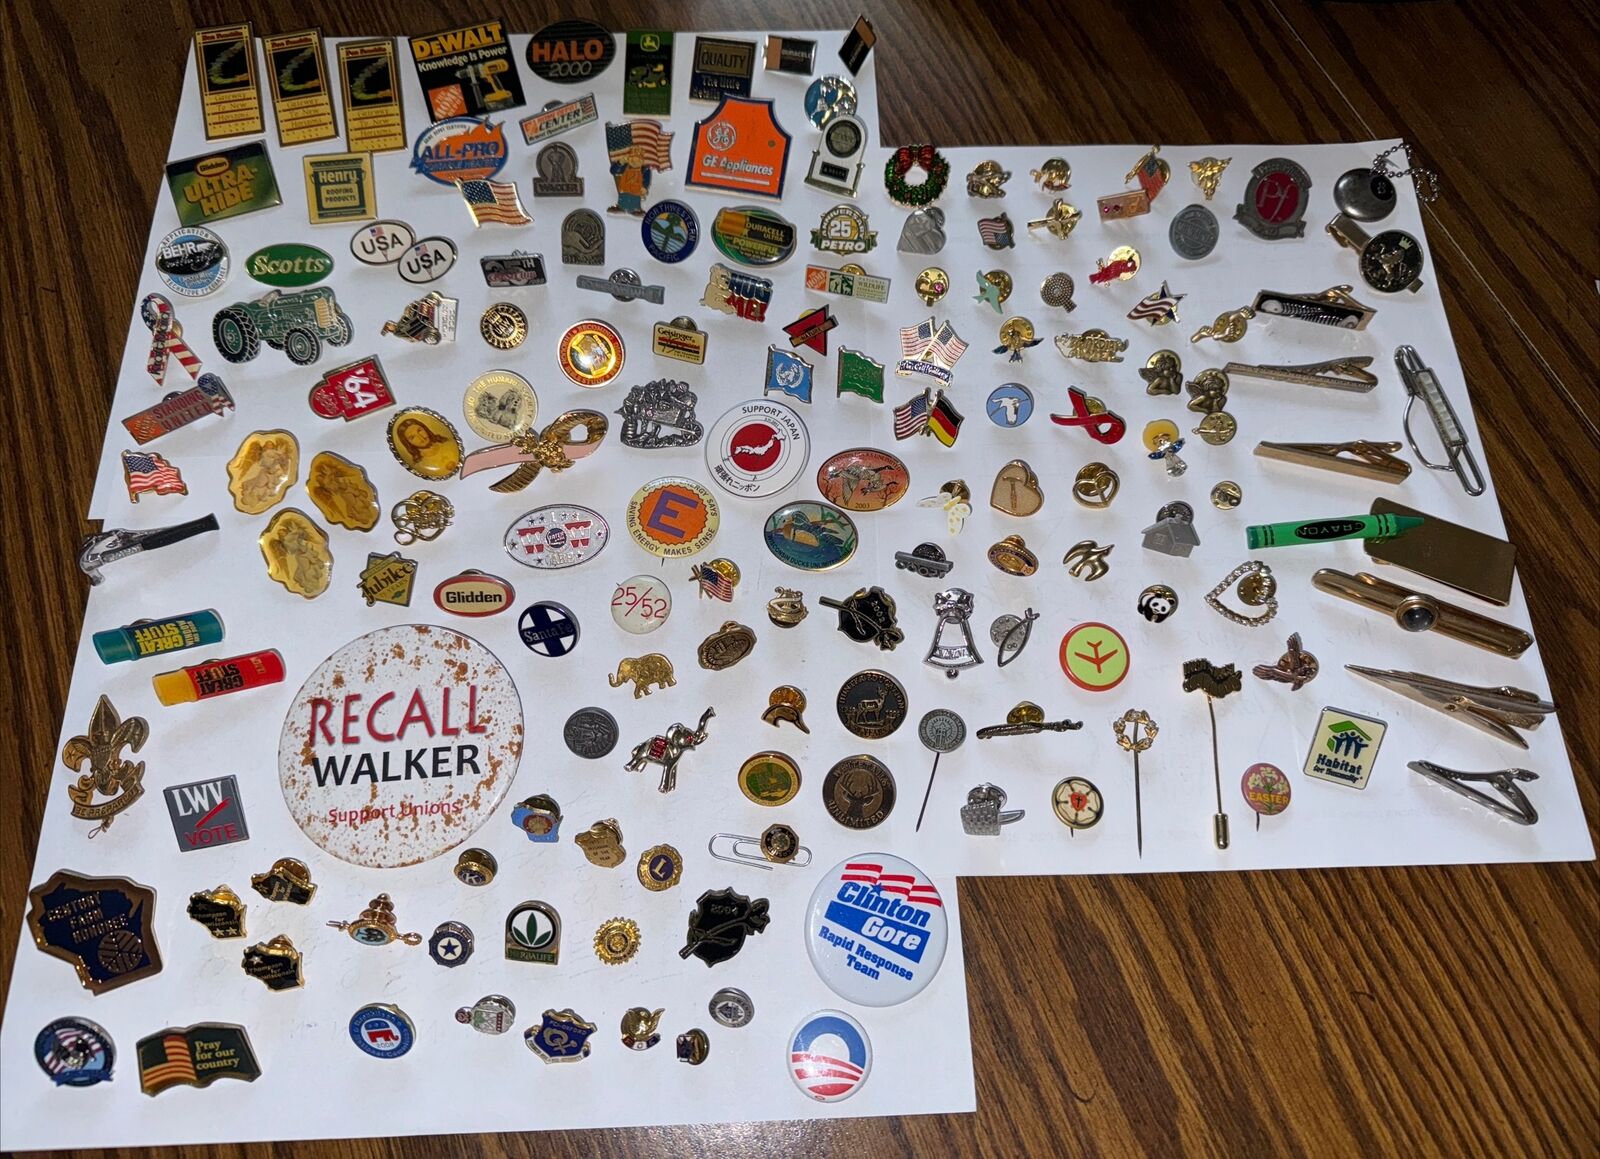 Over 150 Misc. Assorted Pins - Political, Advertising, Flags & Others- Tie Clips